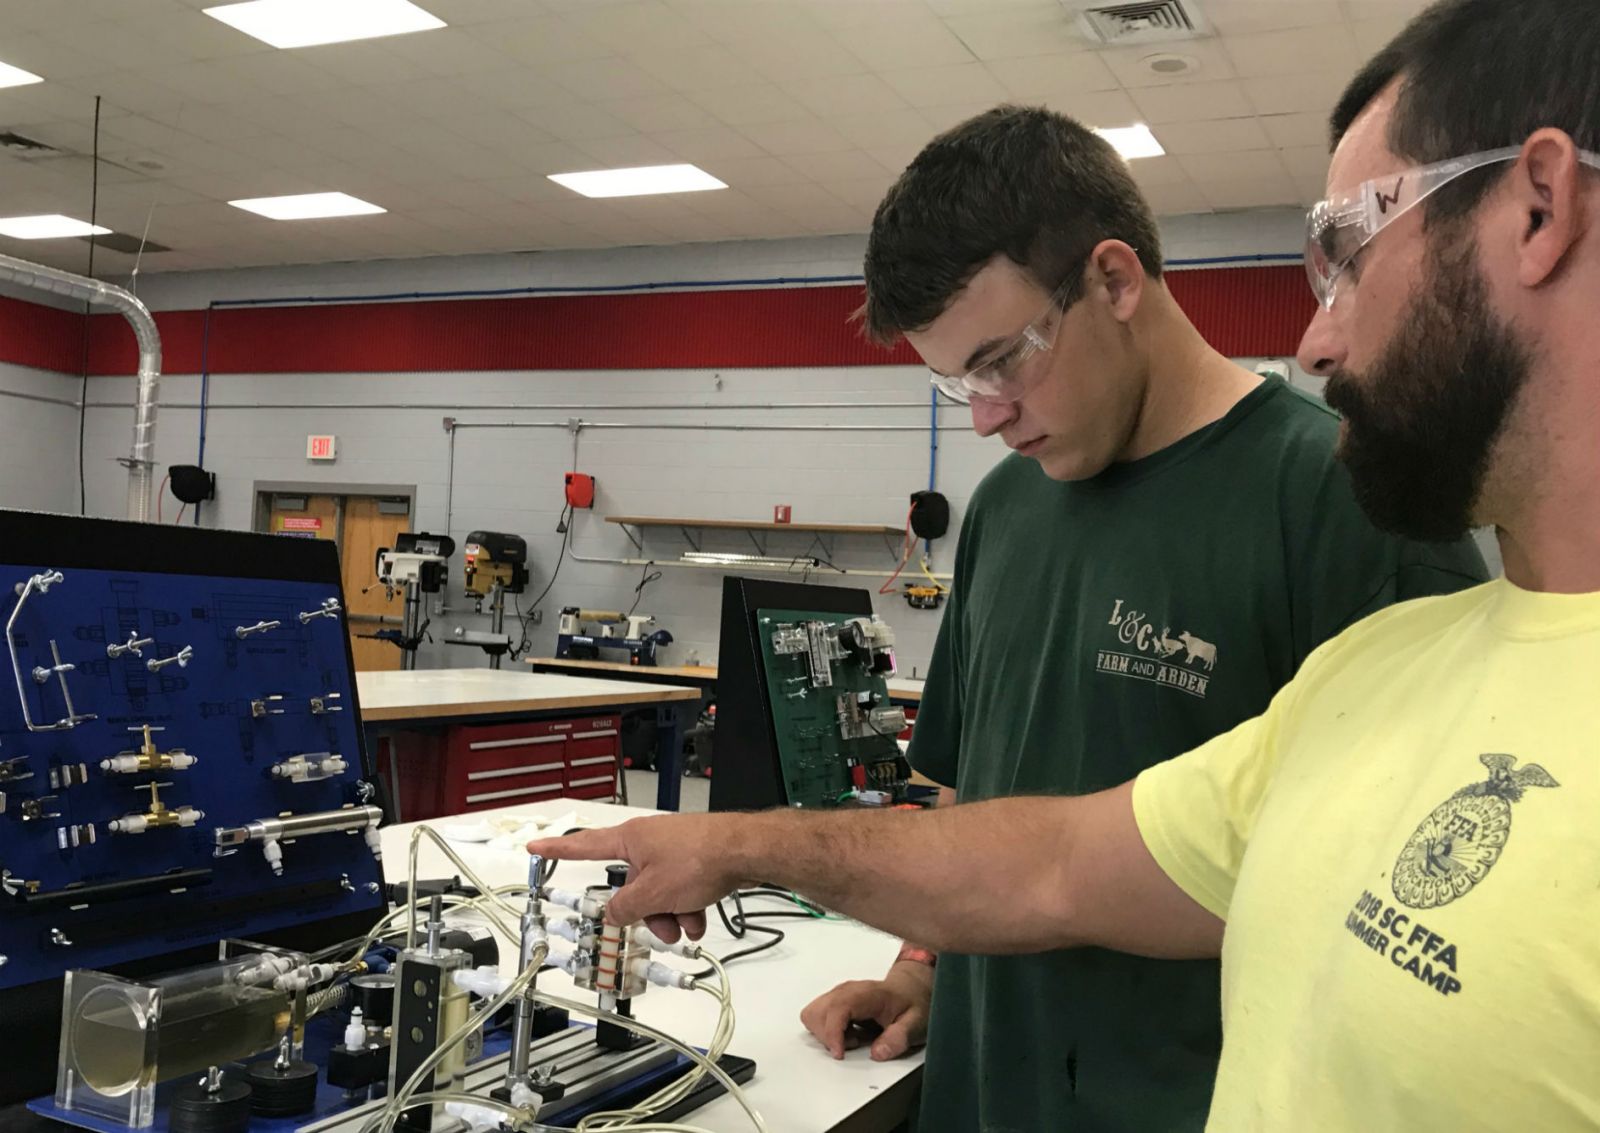 Hunter Richey, a junior at Belton-Honea Path High School, works with a hydraulic trainer under the instruction of his teacher Ben Woody. (Photo/Teresa Cutlip)